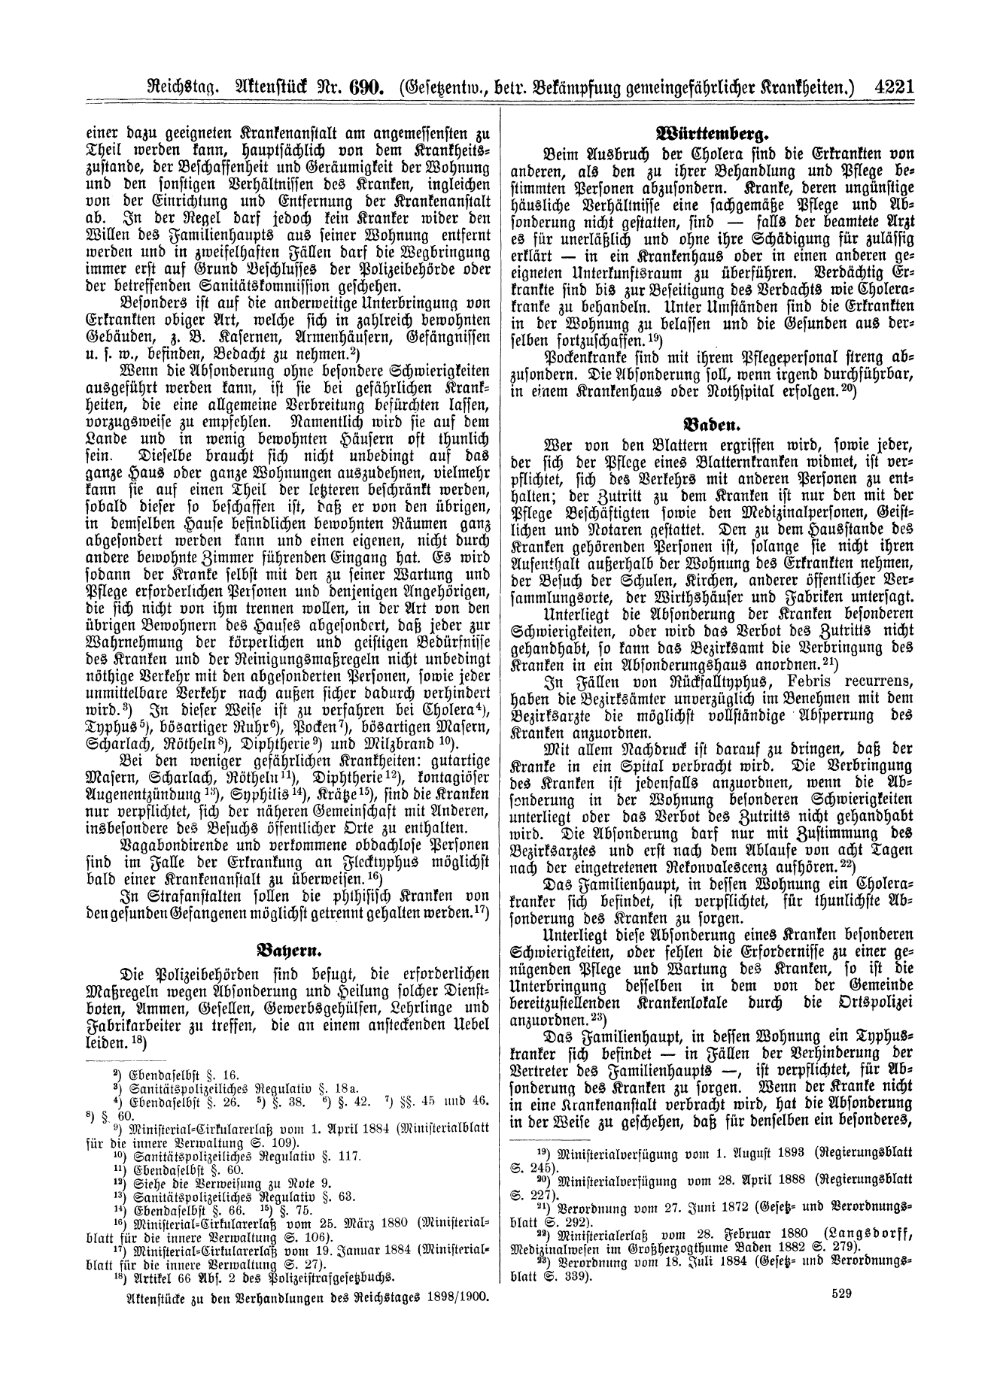 Scan of page 4221